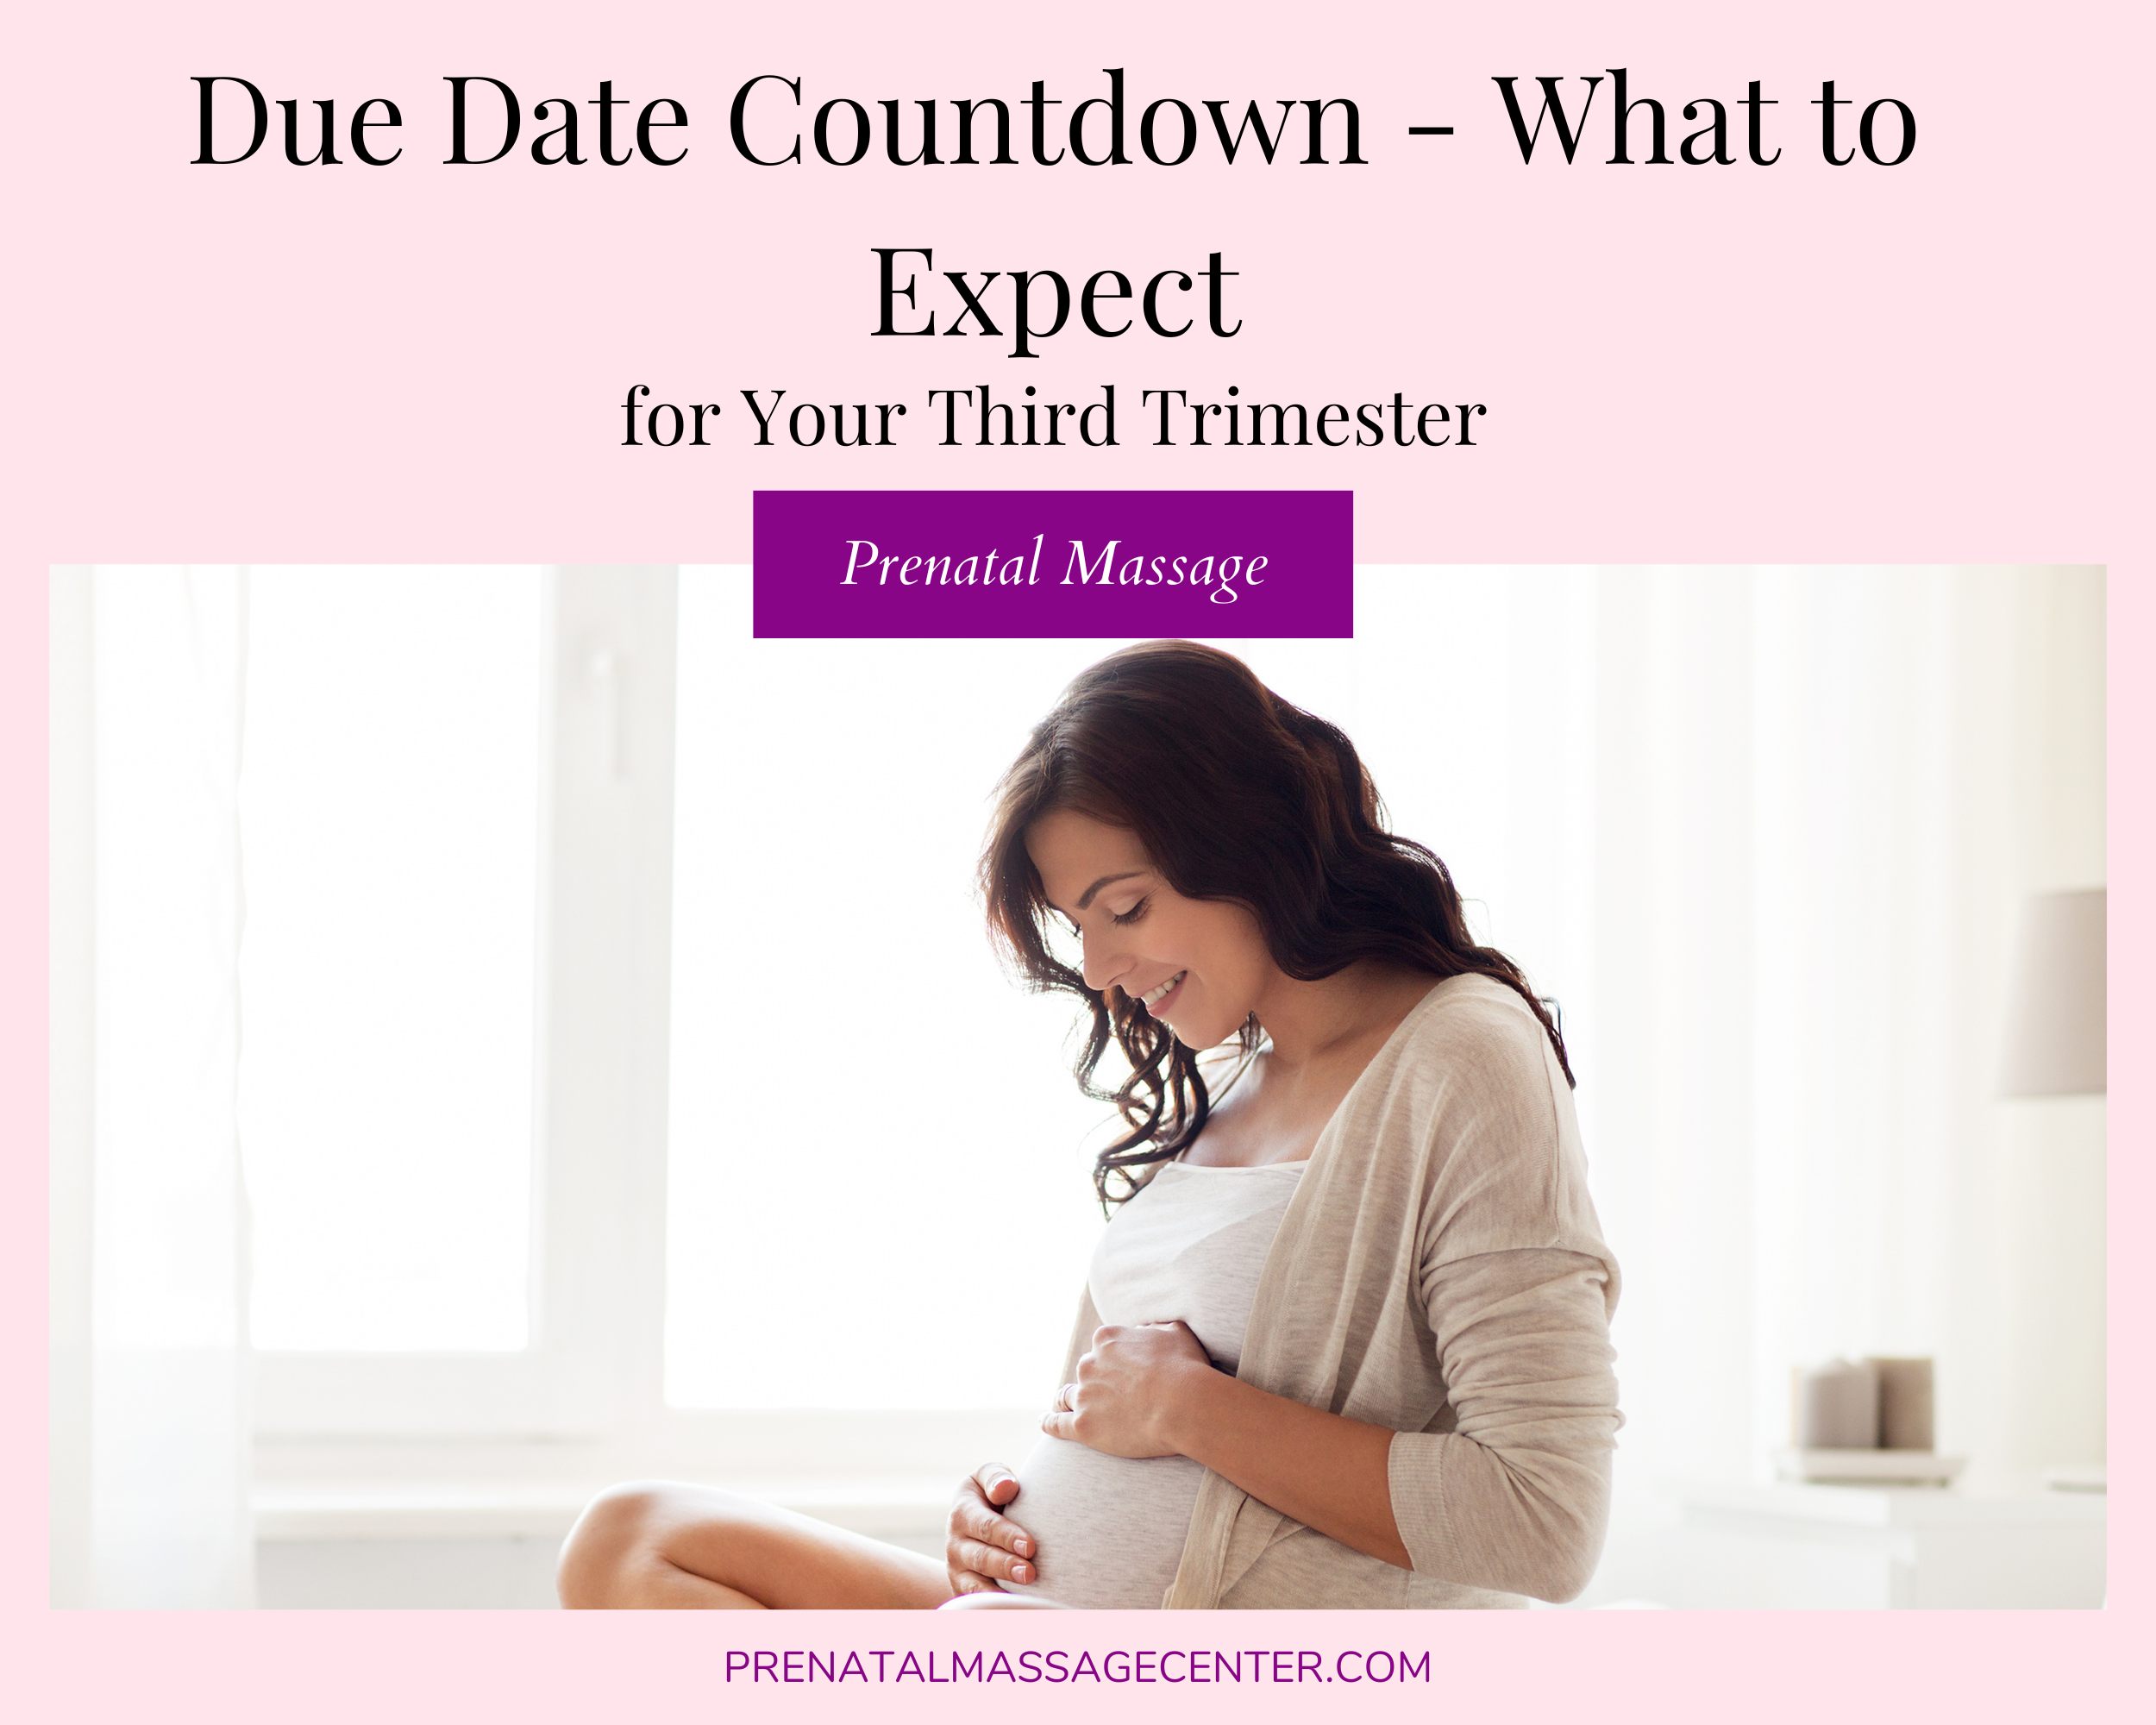 Your third trimester guide